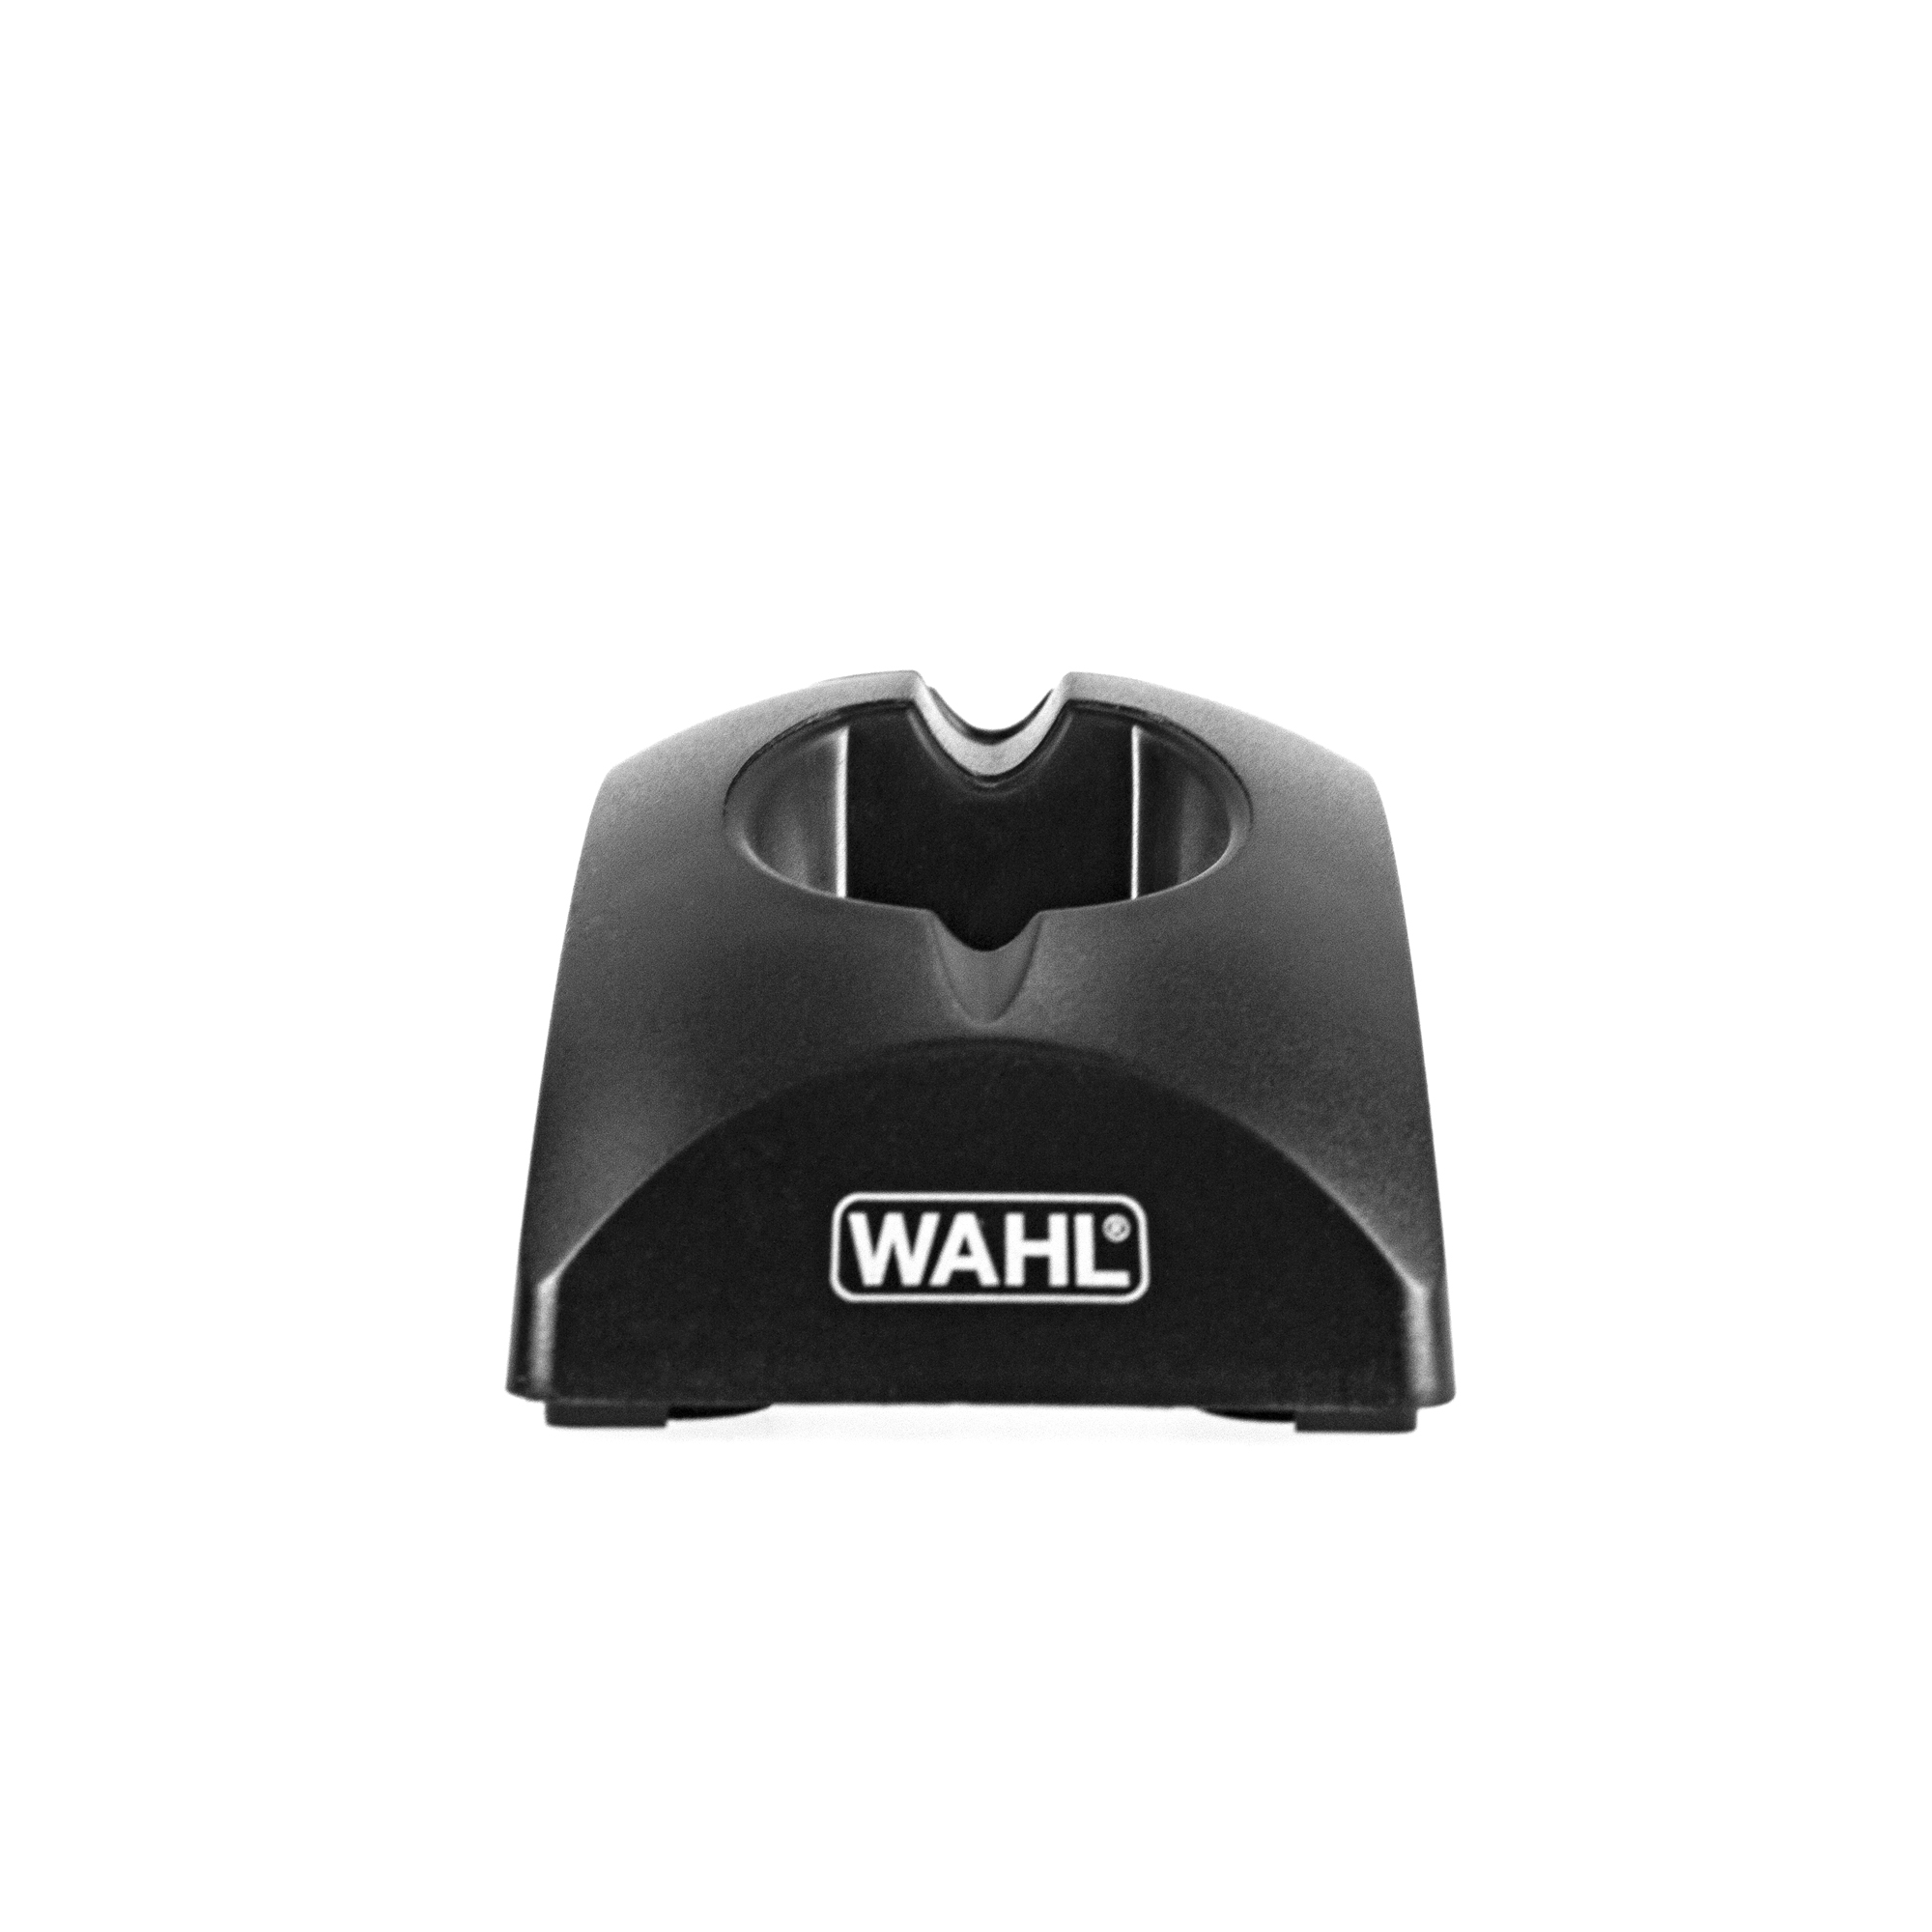 wahl 9655 charger